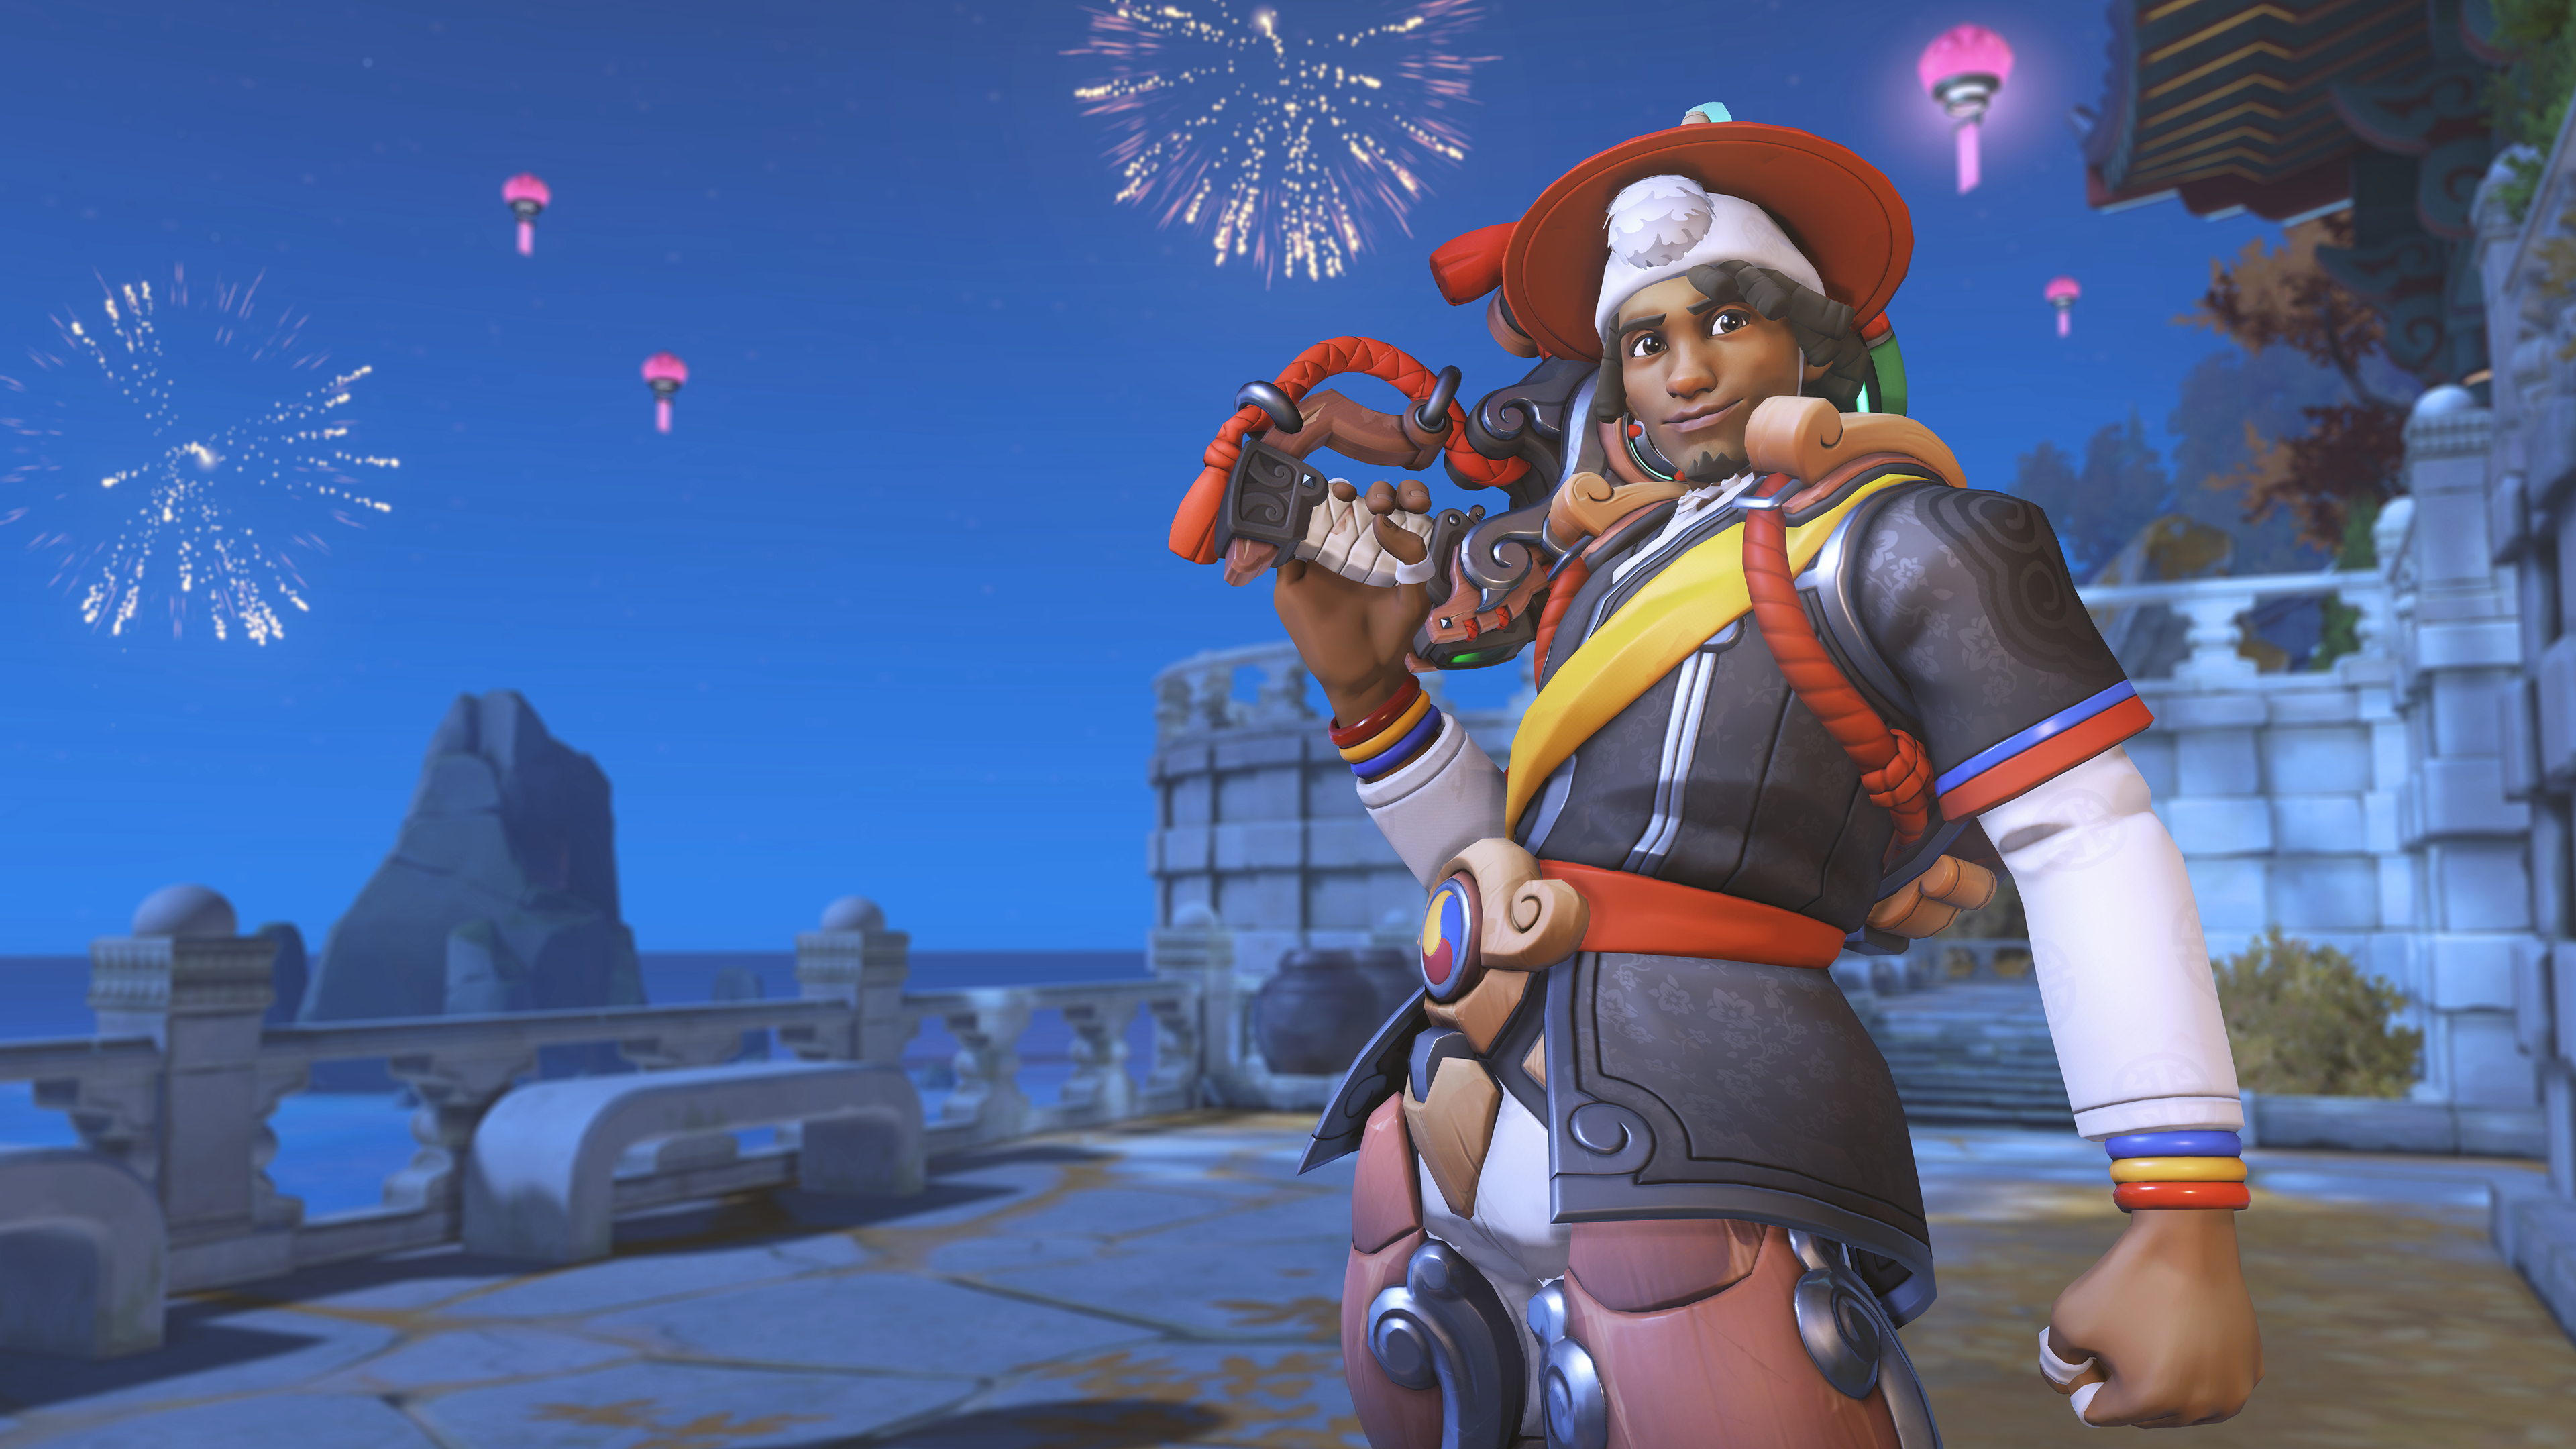 Overwatch 2022 Calendar All Of The Seasonal Events Expected In Overwatch In 2022 - Dot Esports